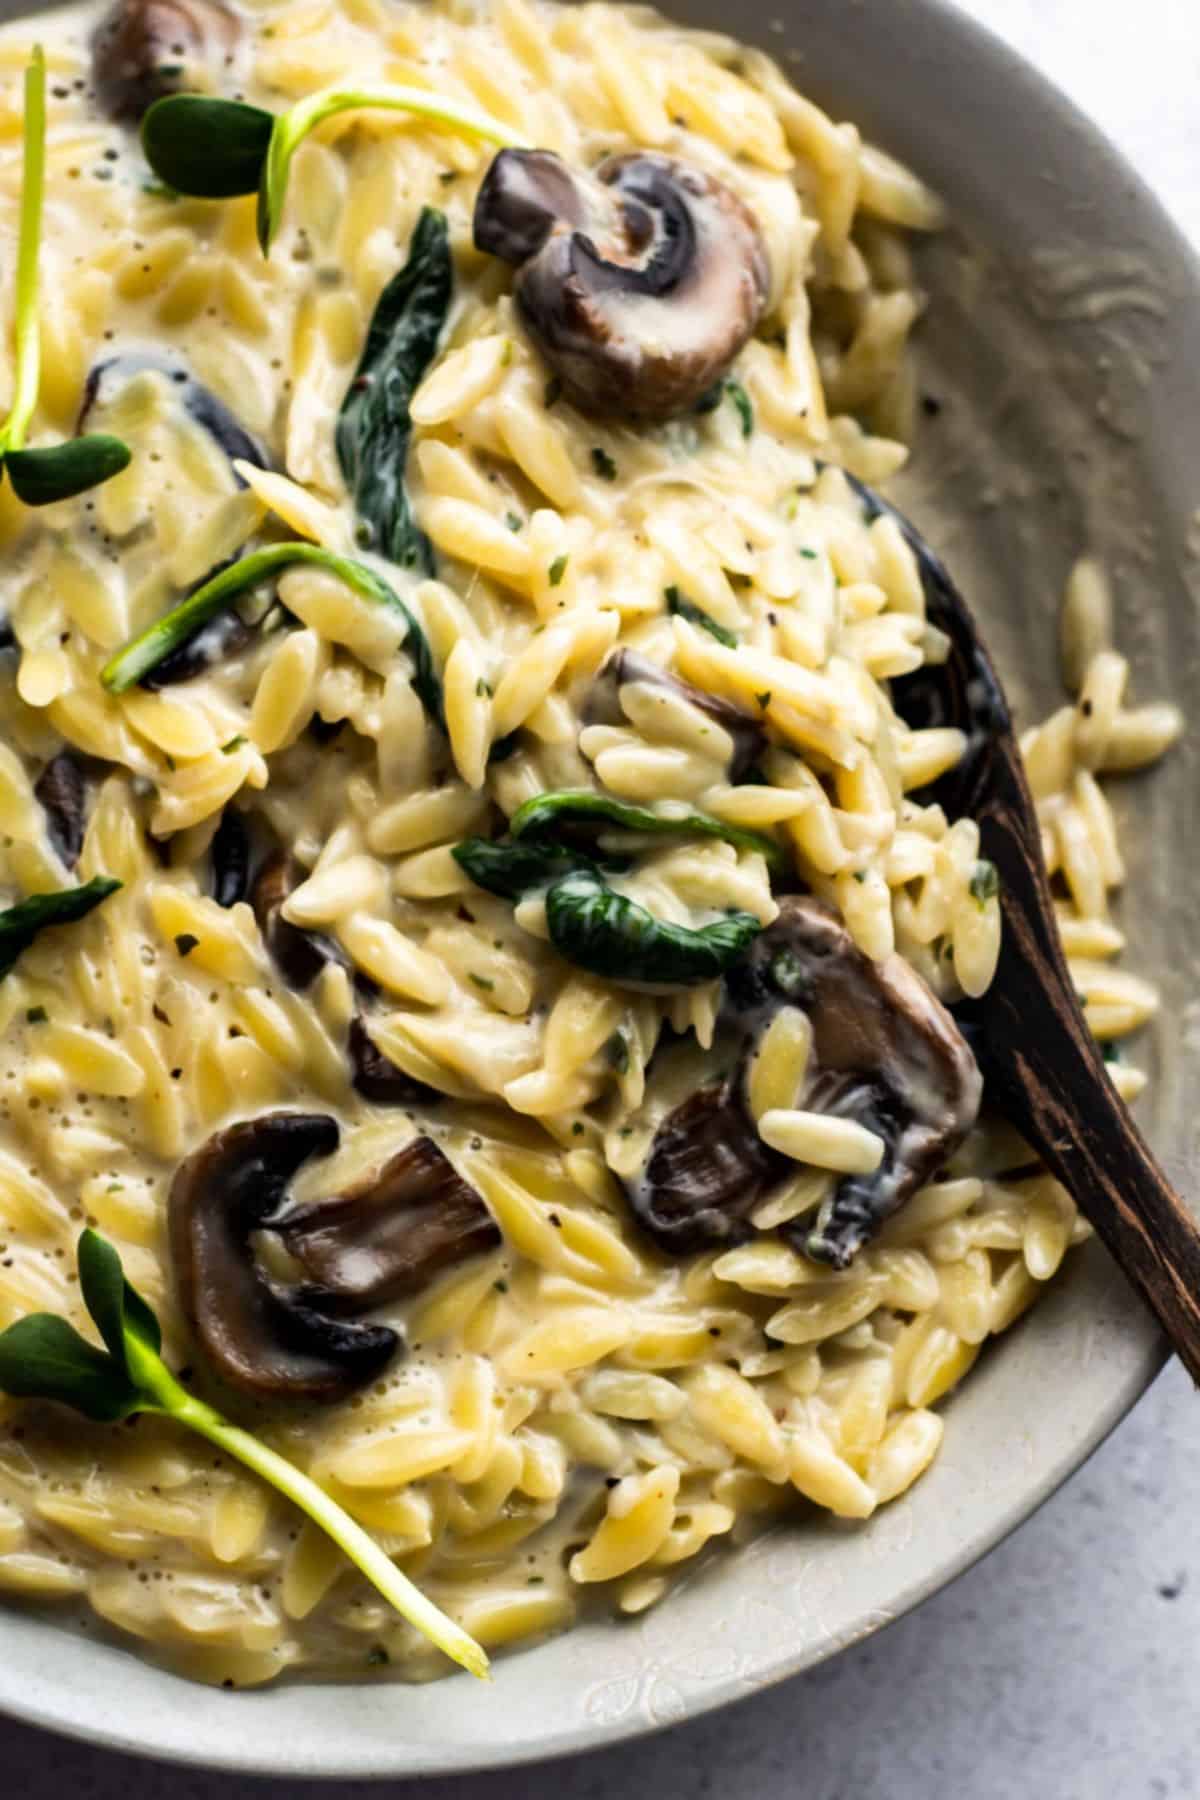 Healthy creamy mushroom orzo in a gray bowl with a wooden spoon.